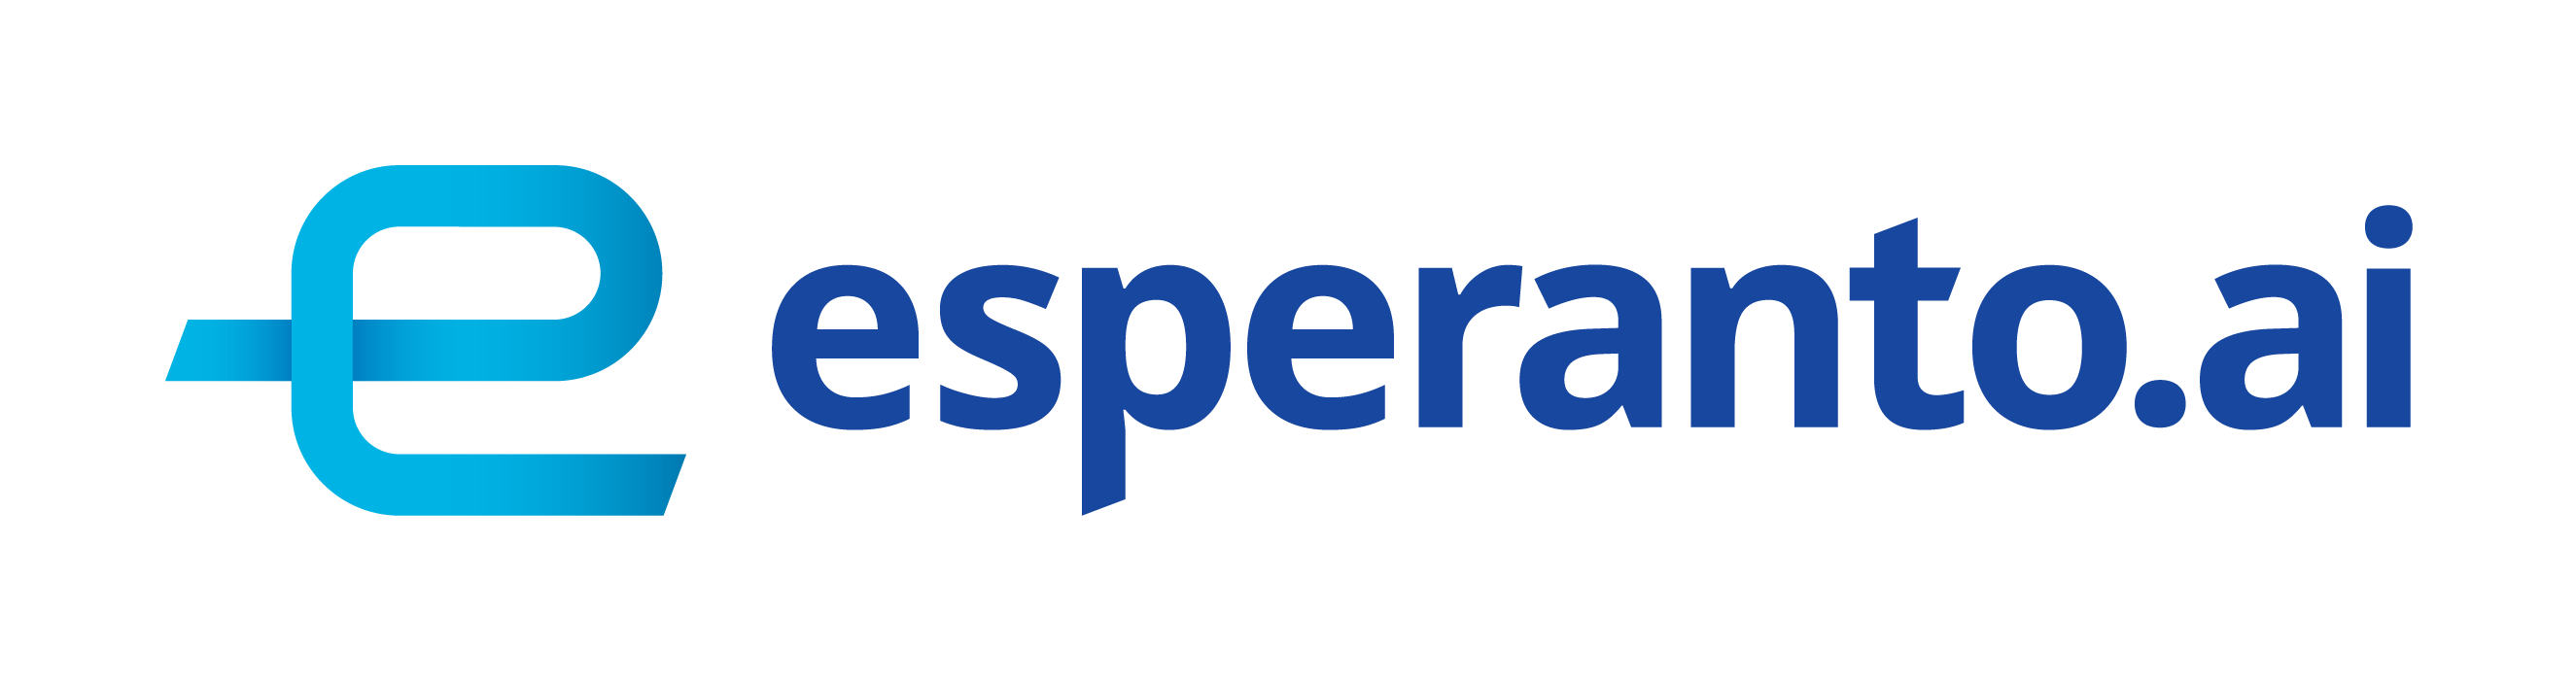 Esperanto Technologies Partners with Intel to Advance Massively Parallel RISC-V-based AI Acceleration Solutions | Esperanto Technologies